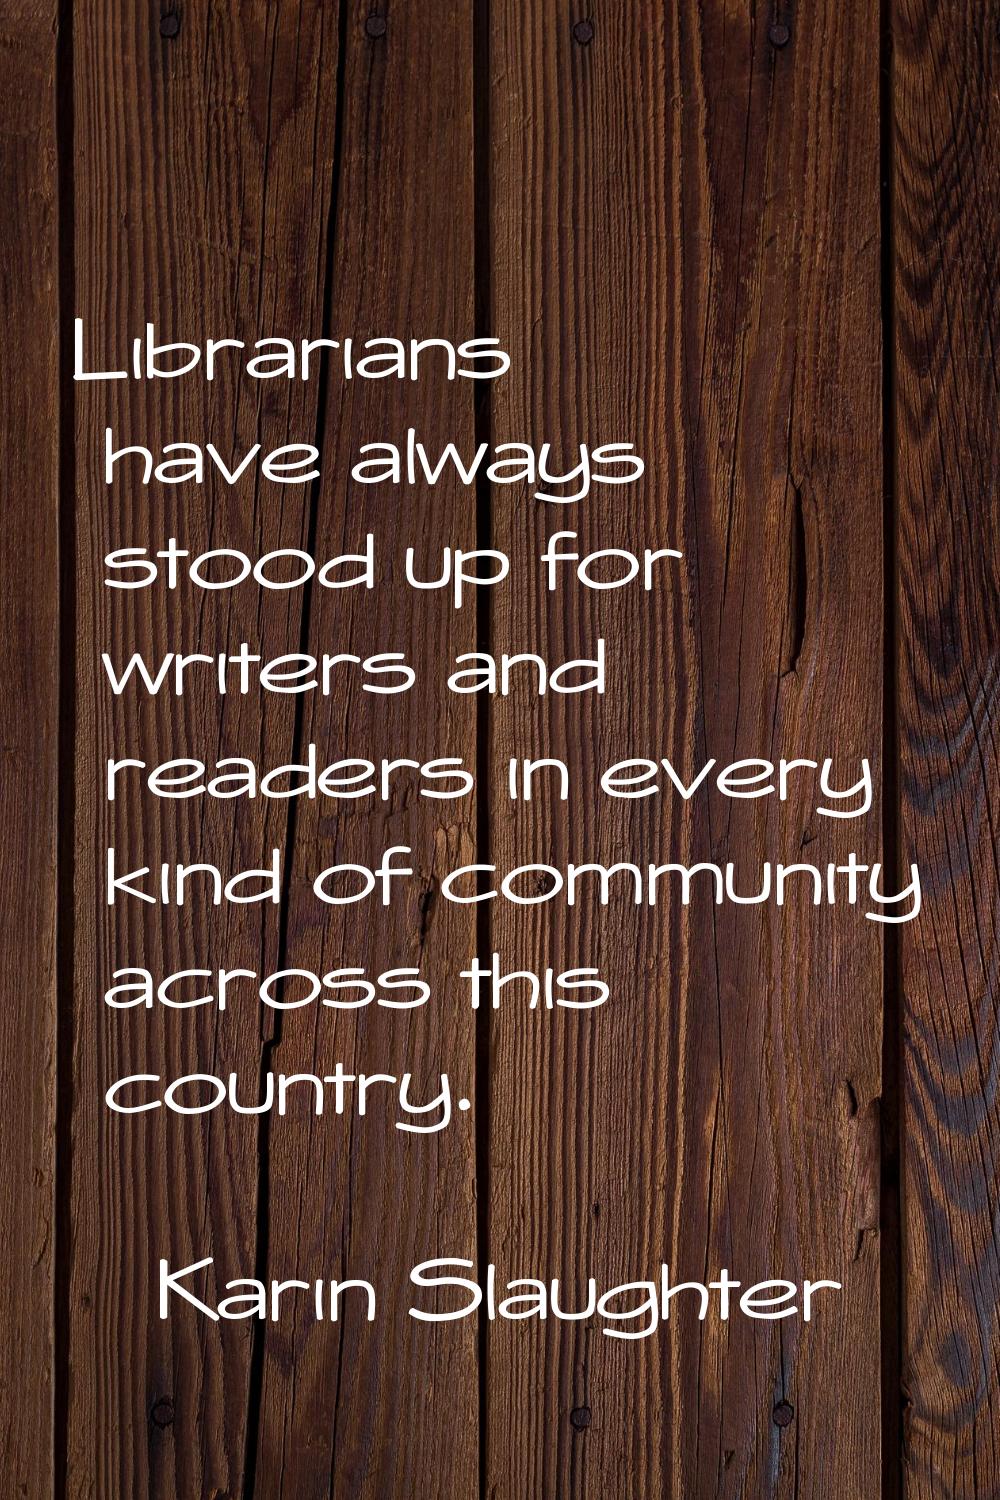 Librarians have always stood up for writers and readers in every kind of community across this coun